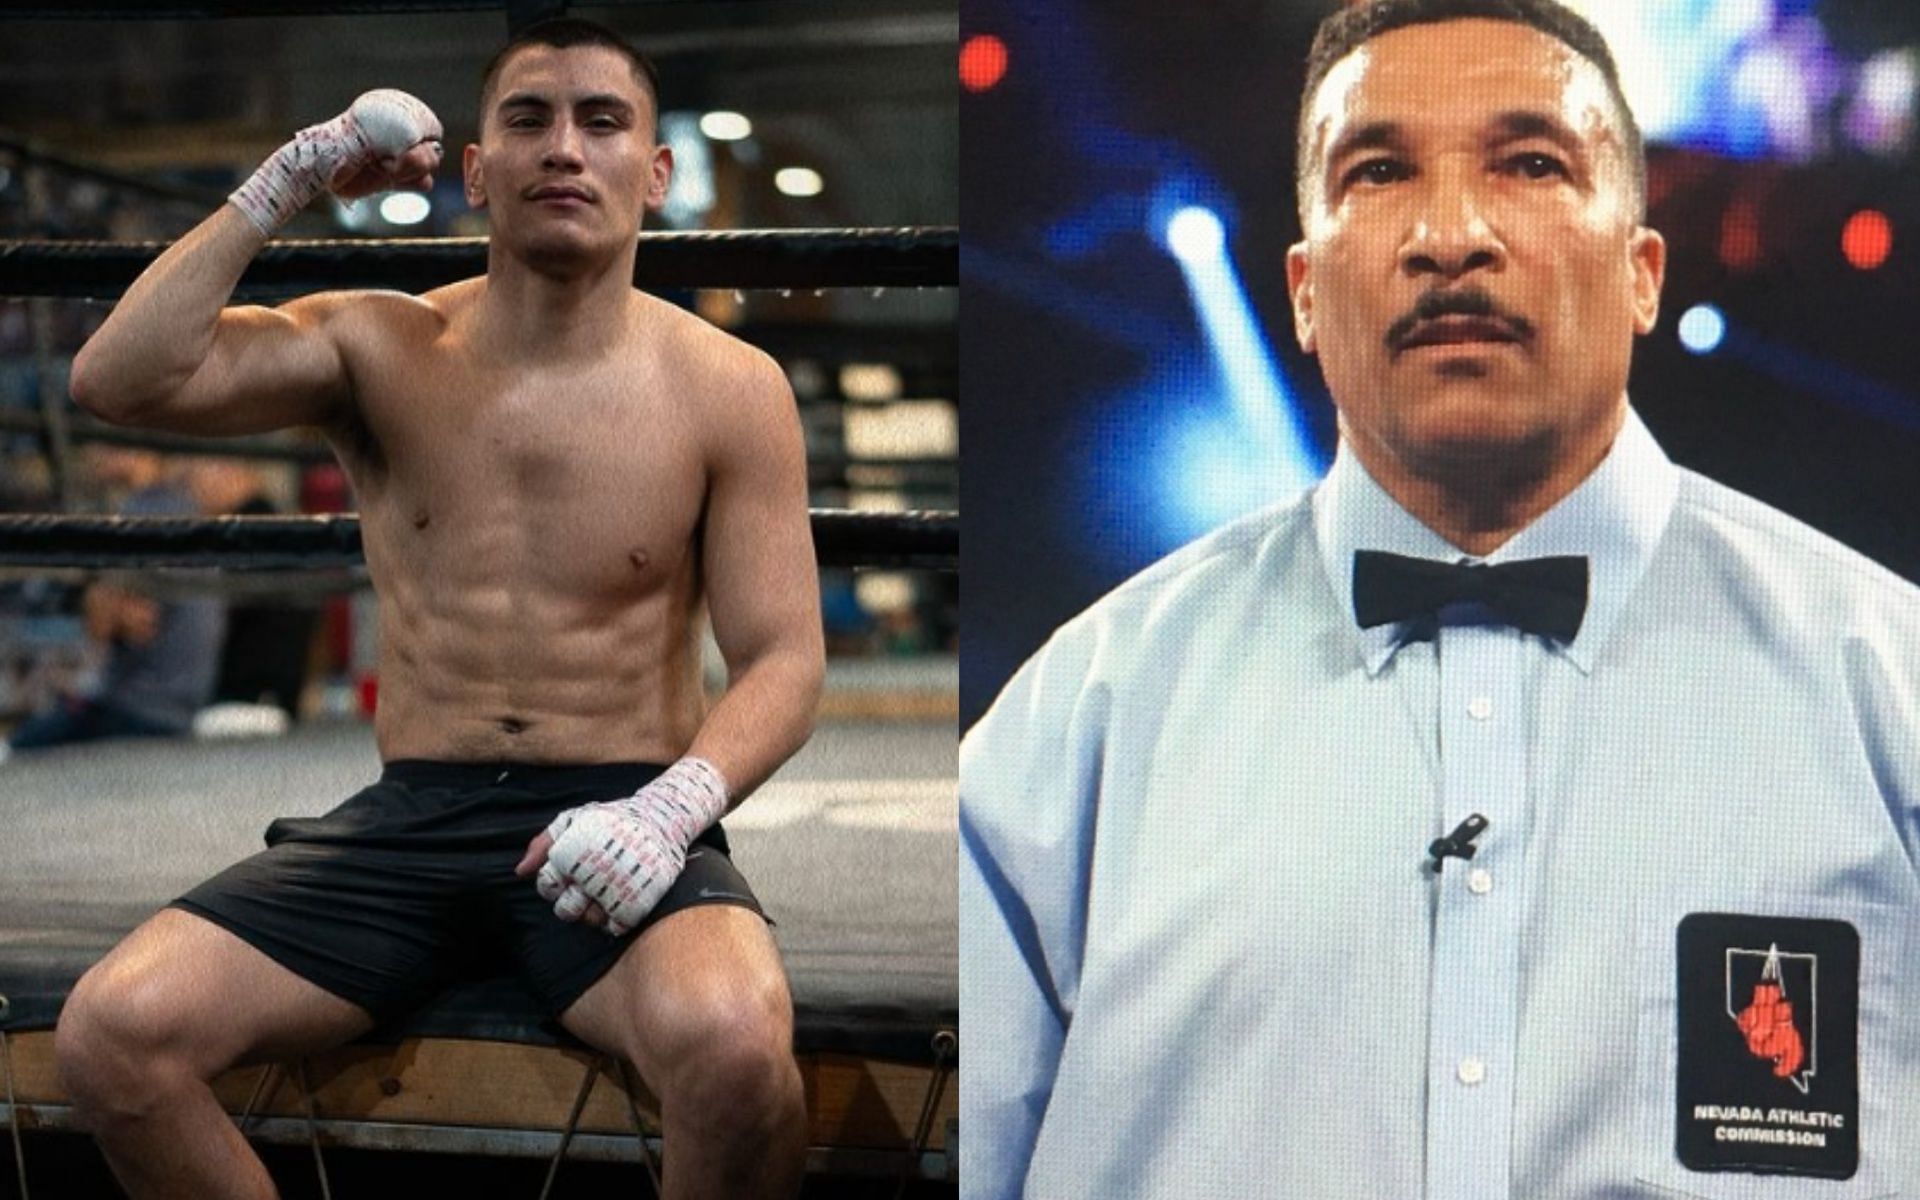 Vergil Ortiz Jr. scored a controversial win on Saturday. [Images via @vergilortizjr and @tonyweeks_official on Instagram]